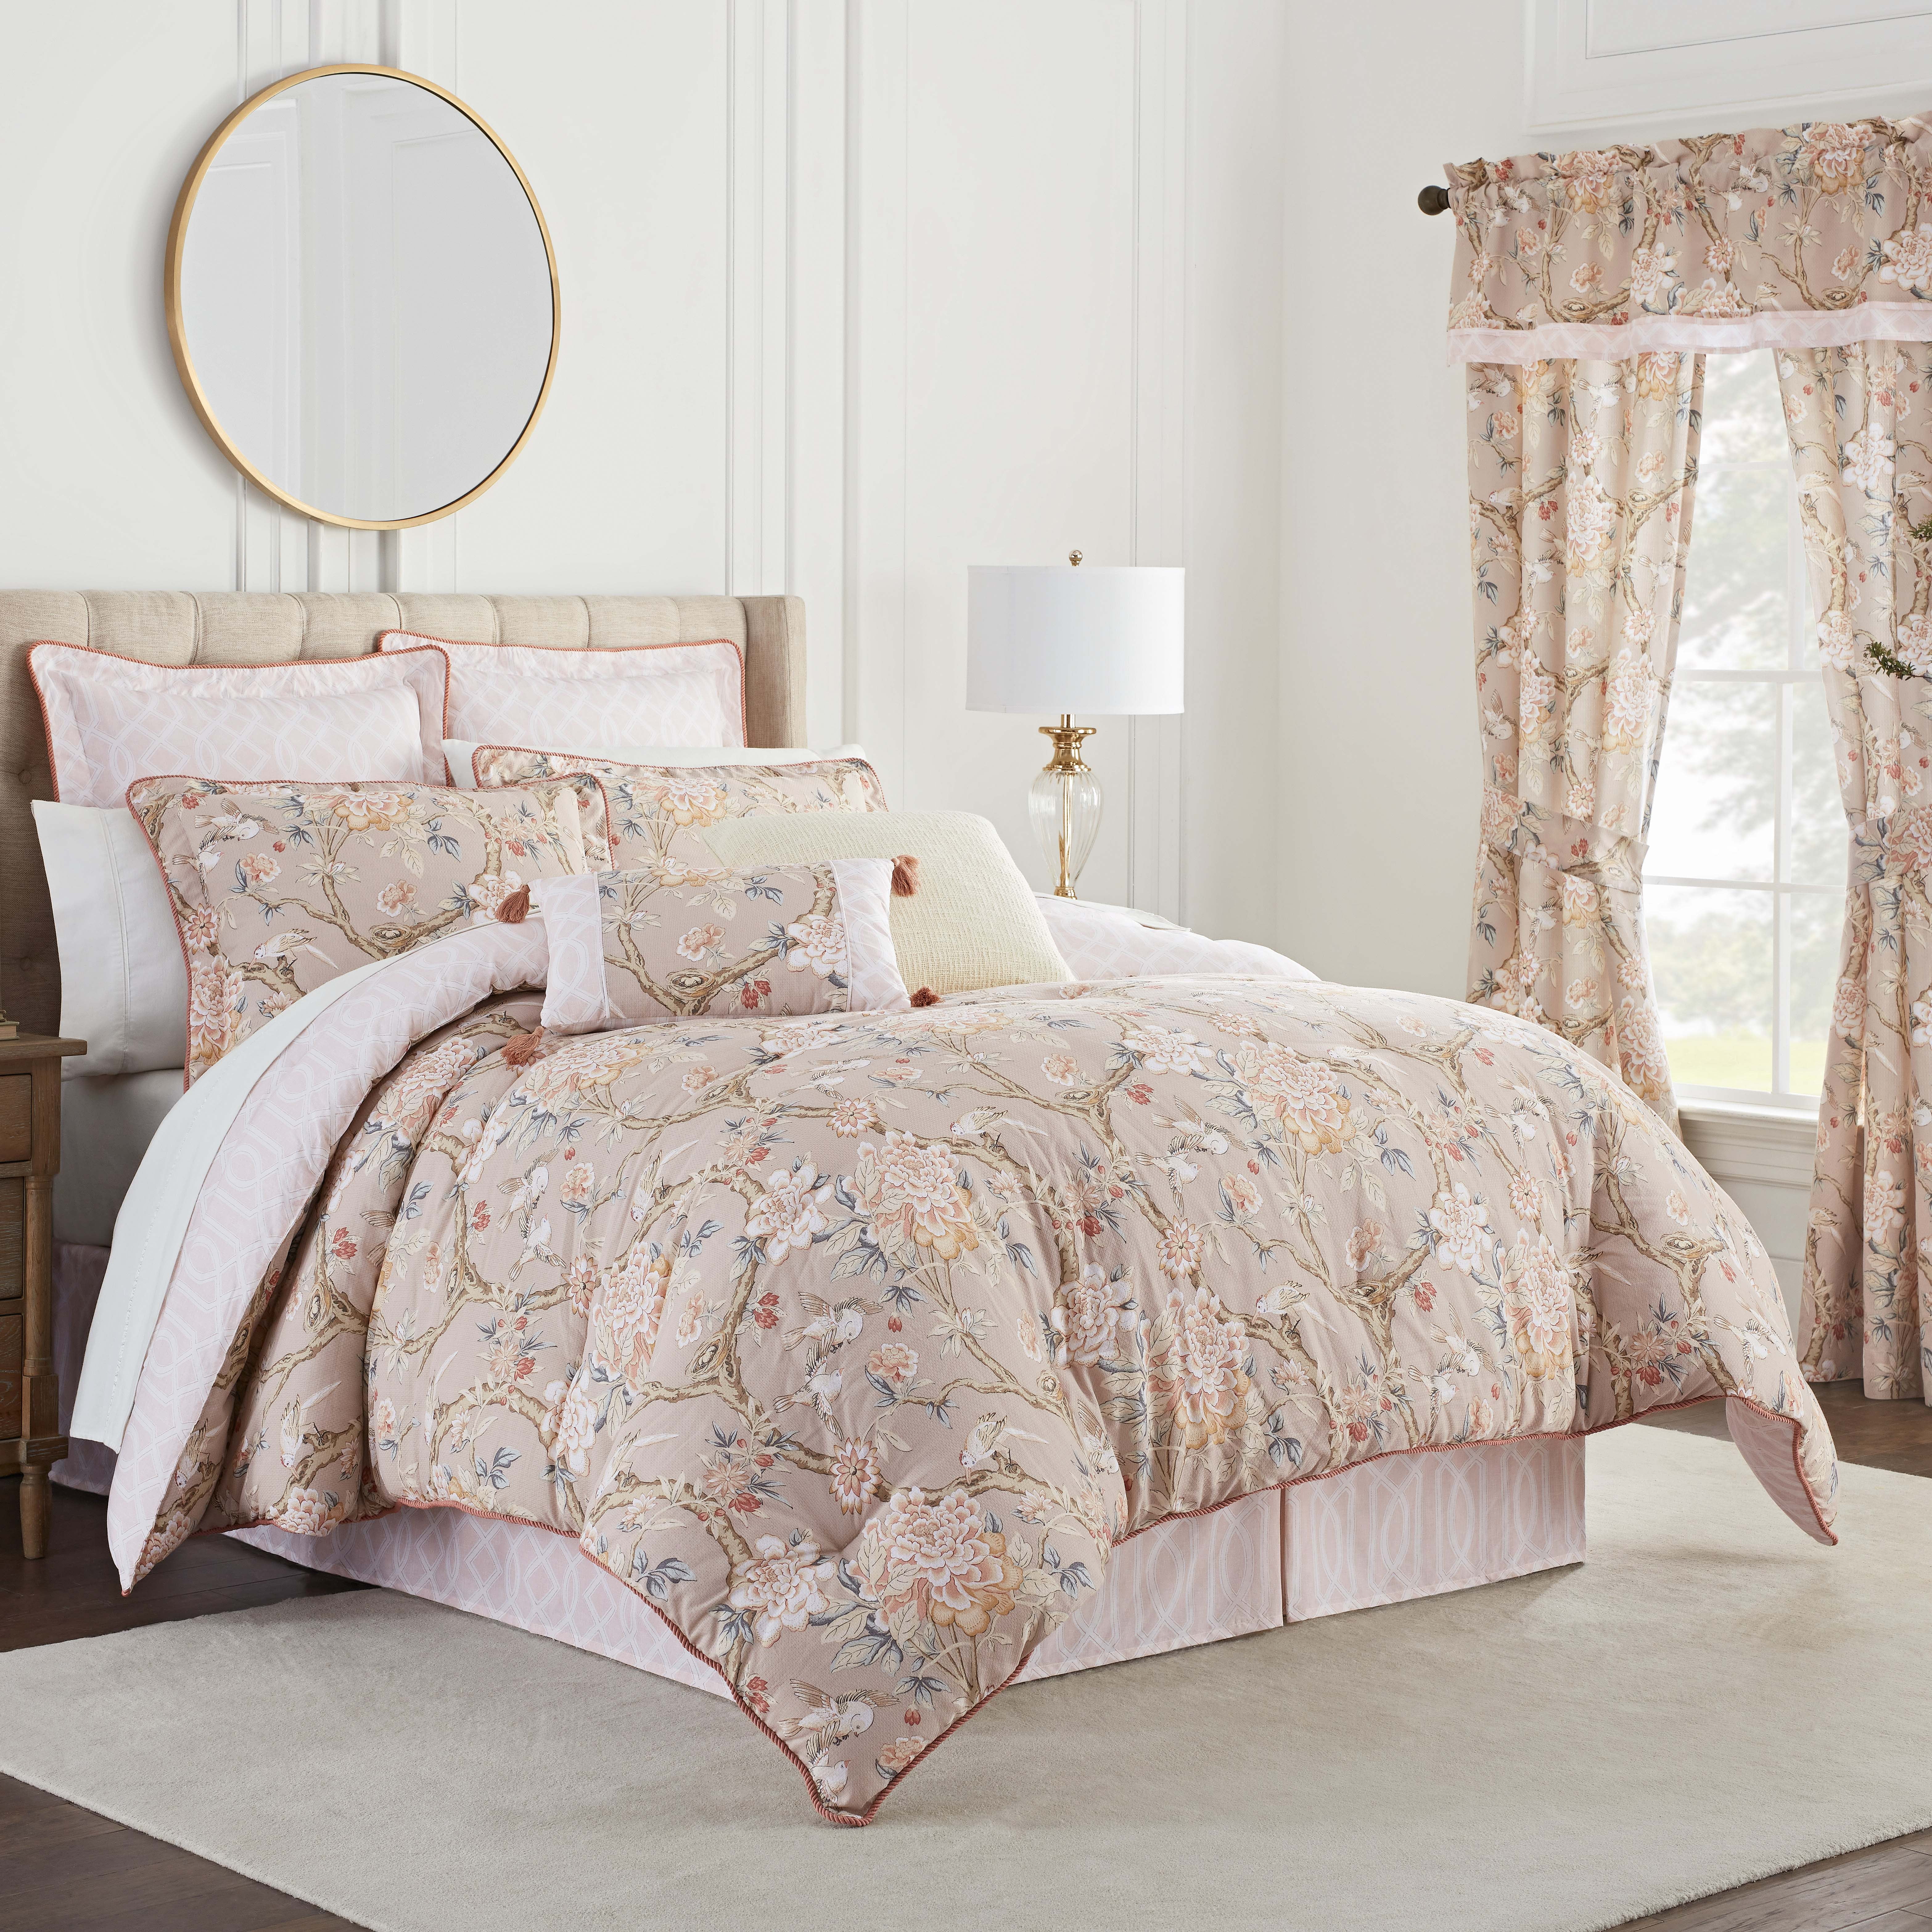 Traditions by Waverly Anatalya Jewel 3 piece Full/Queen Comforter Set 